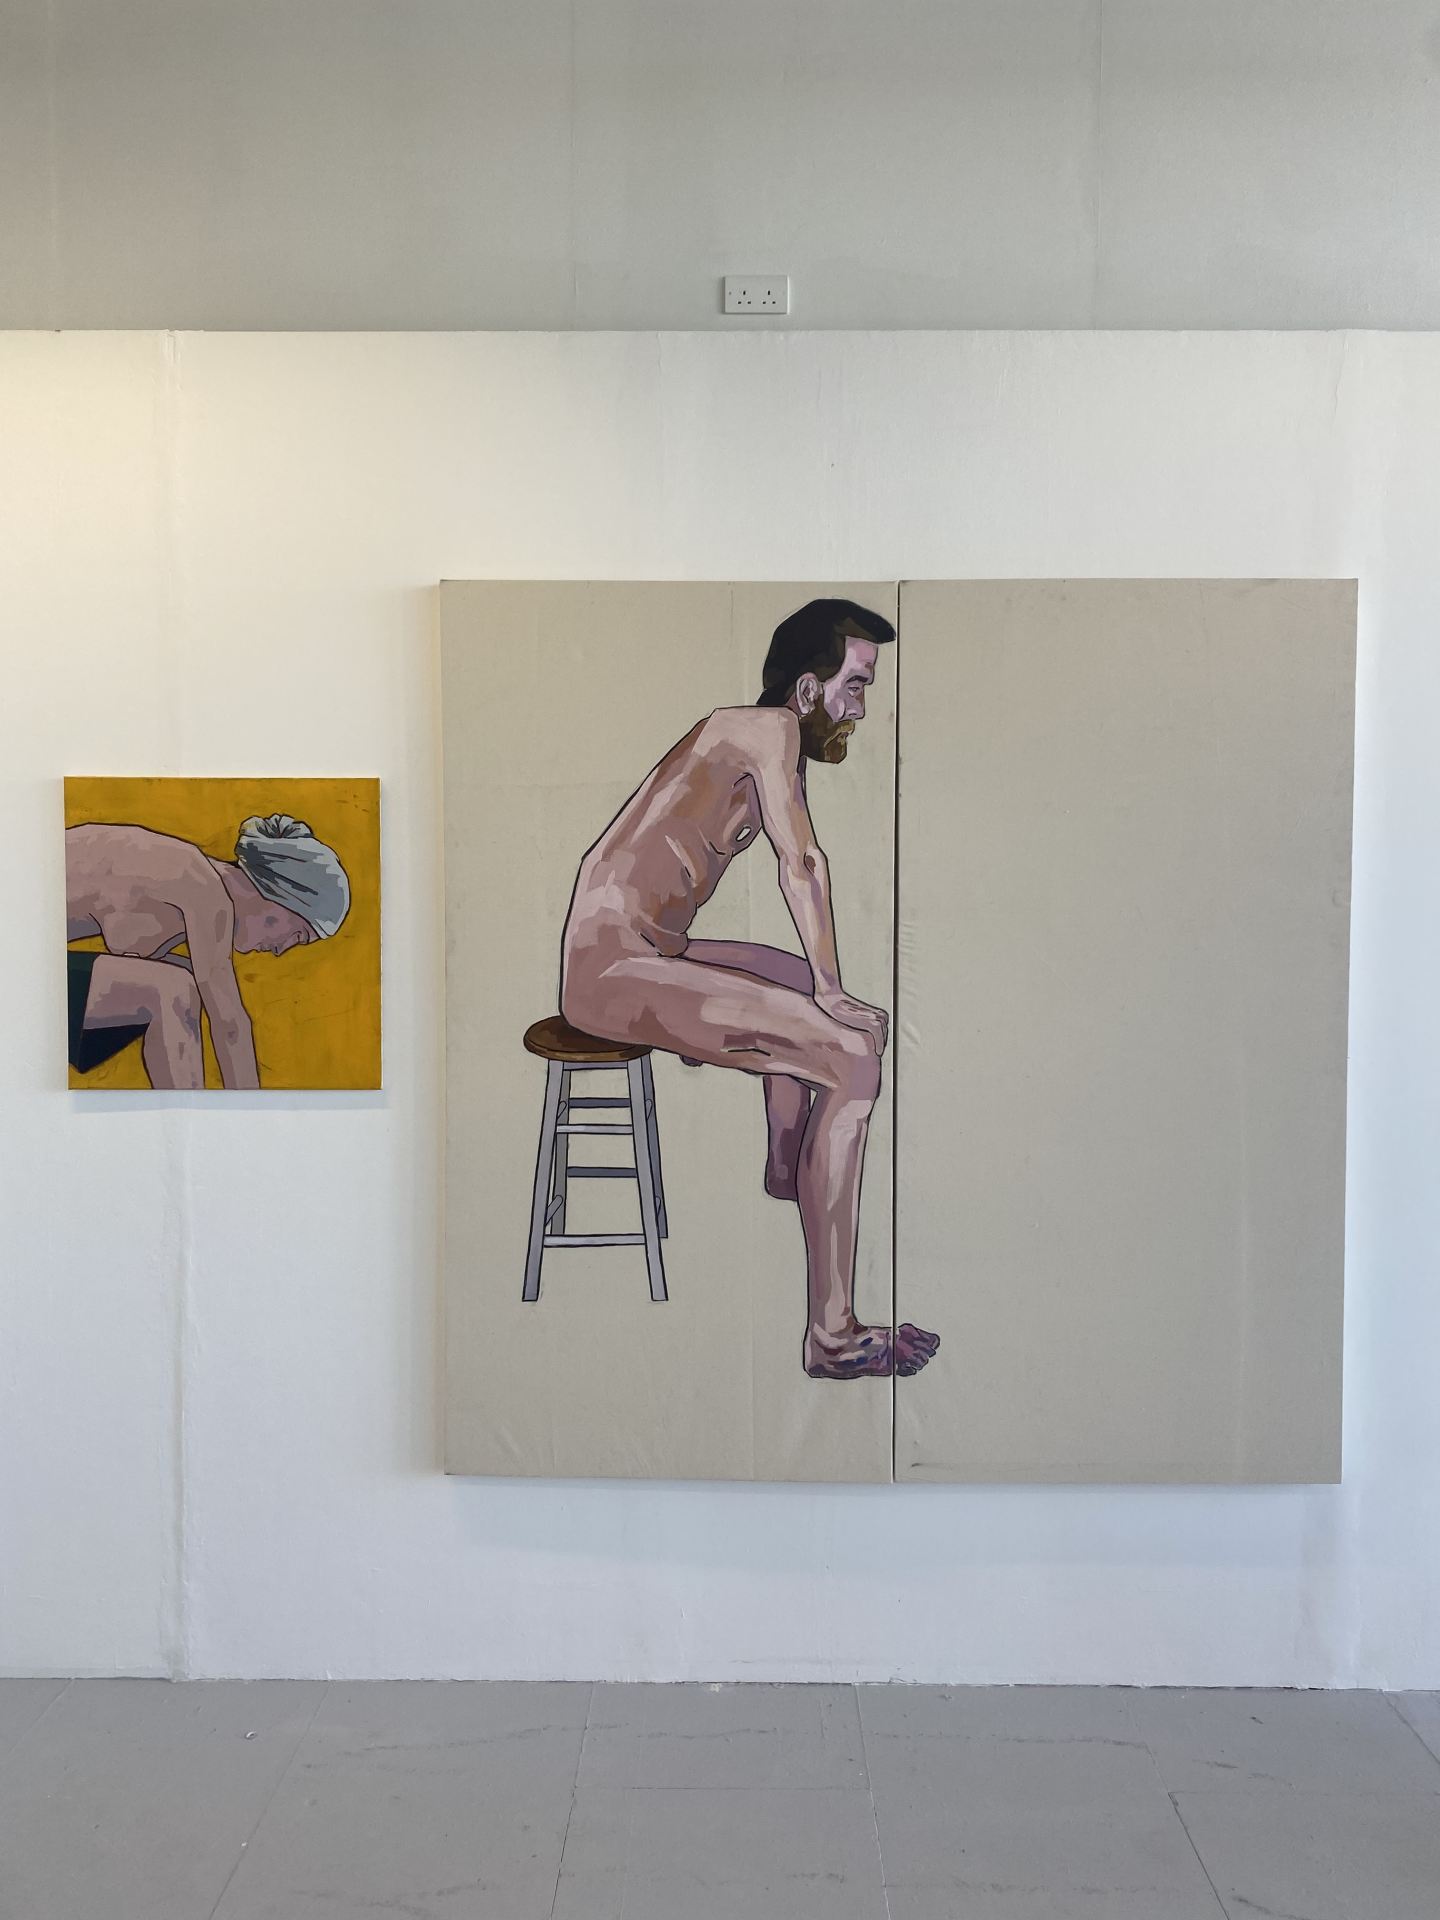 A painting of a person gazing downwards on a yellow canvas, next to a larger diptych of a man sitting naked on a stool.